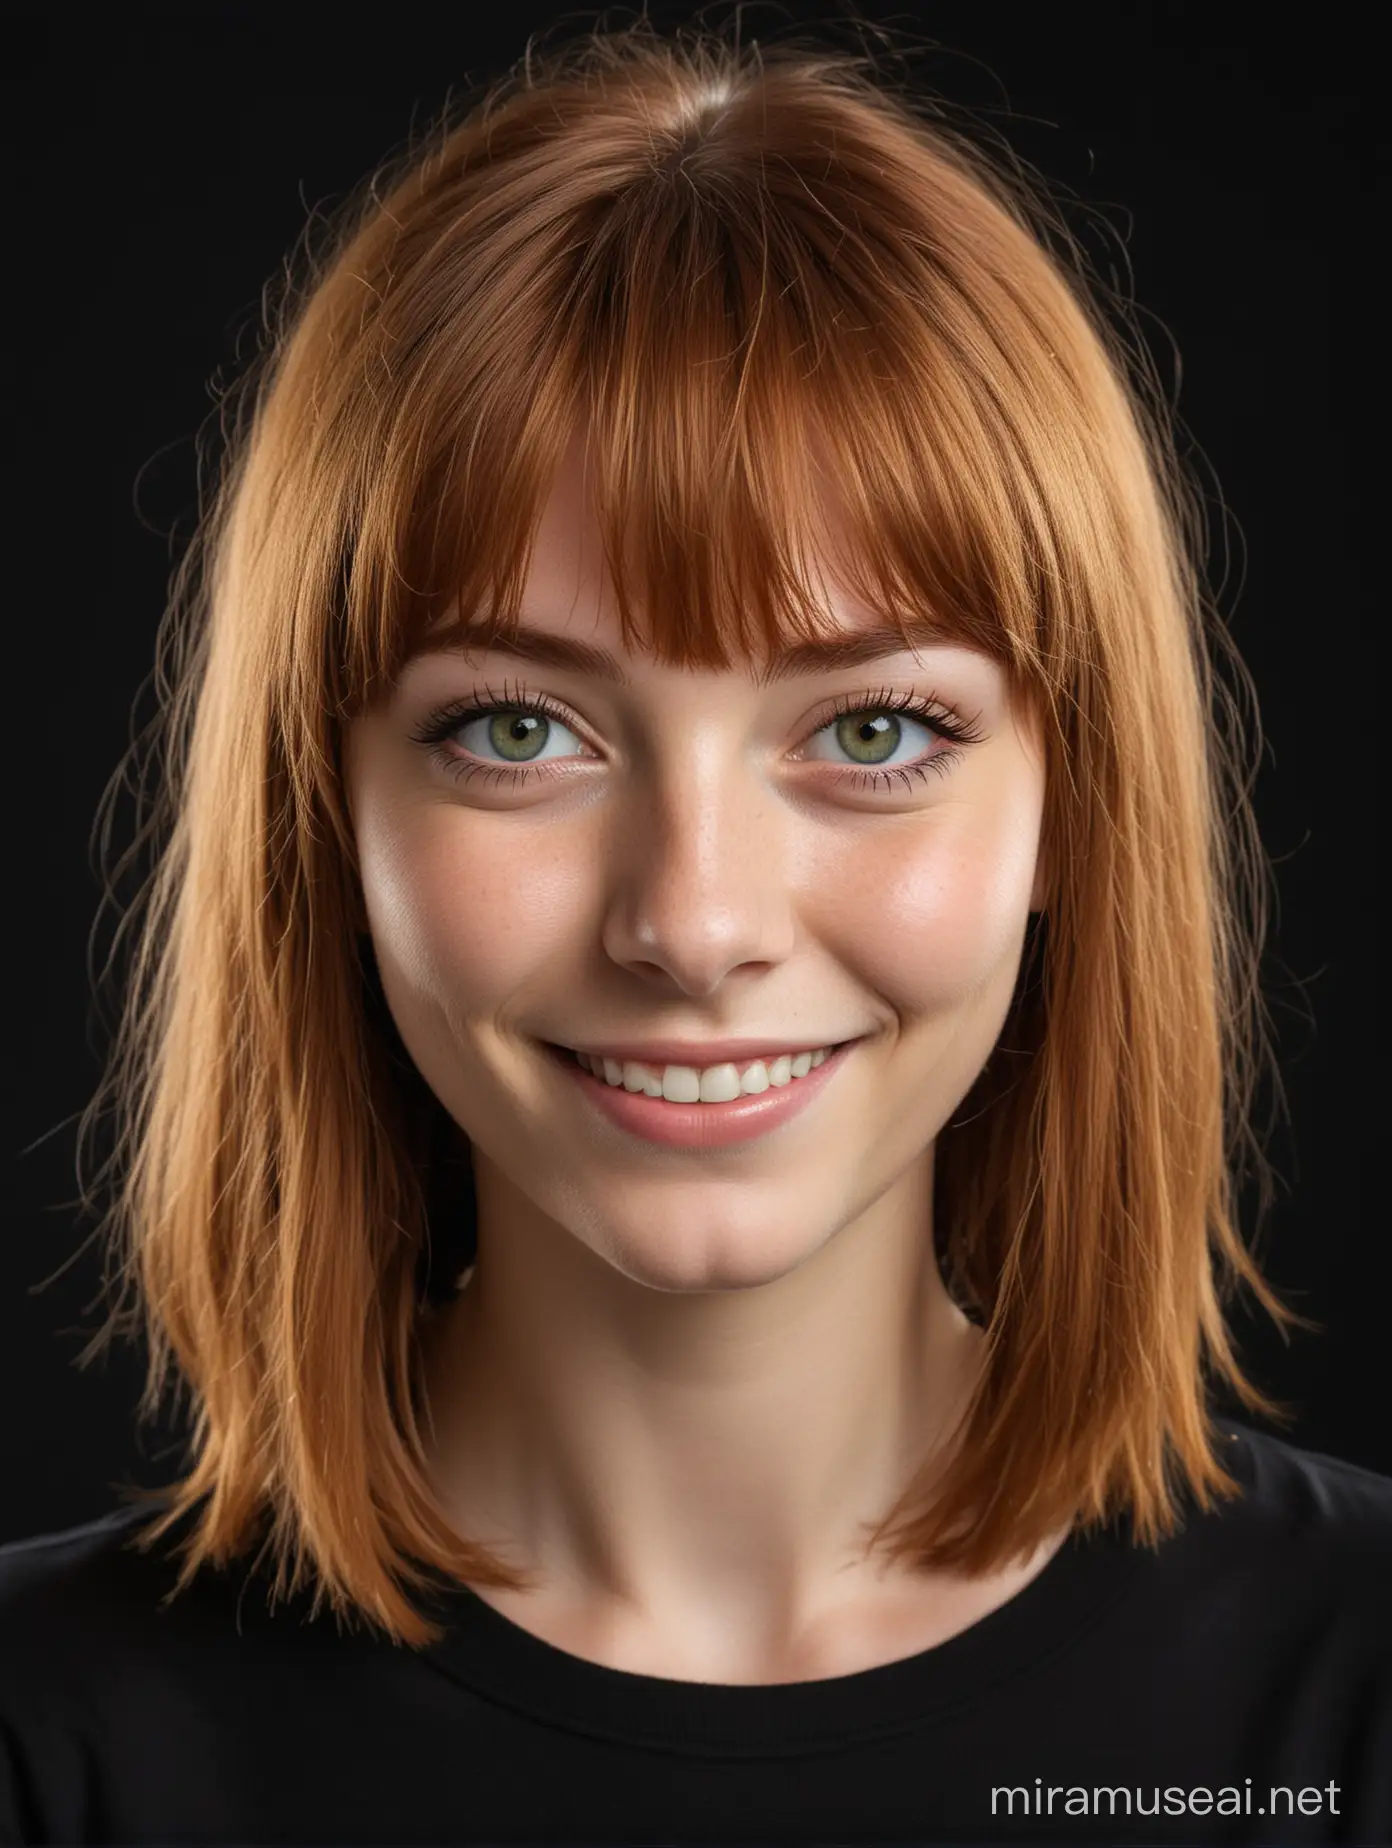 Portrait of a Smiling Girl with Striking Green Eyes and Ginger Hair